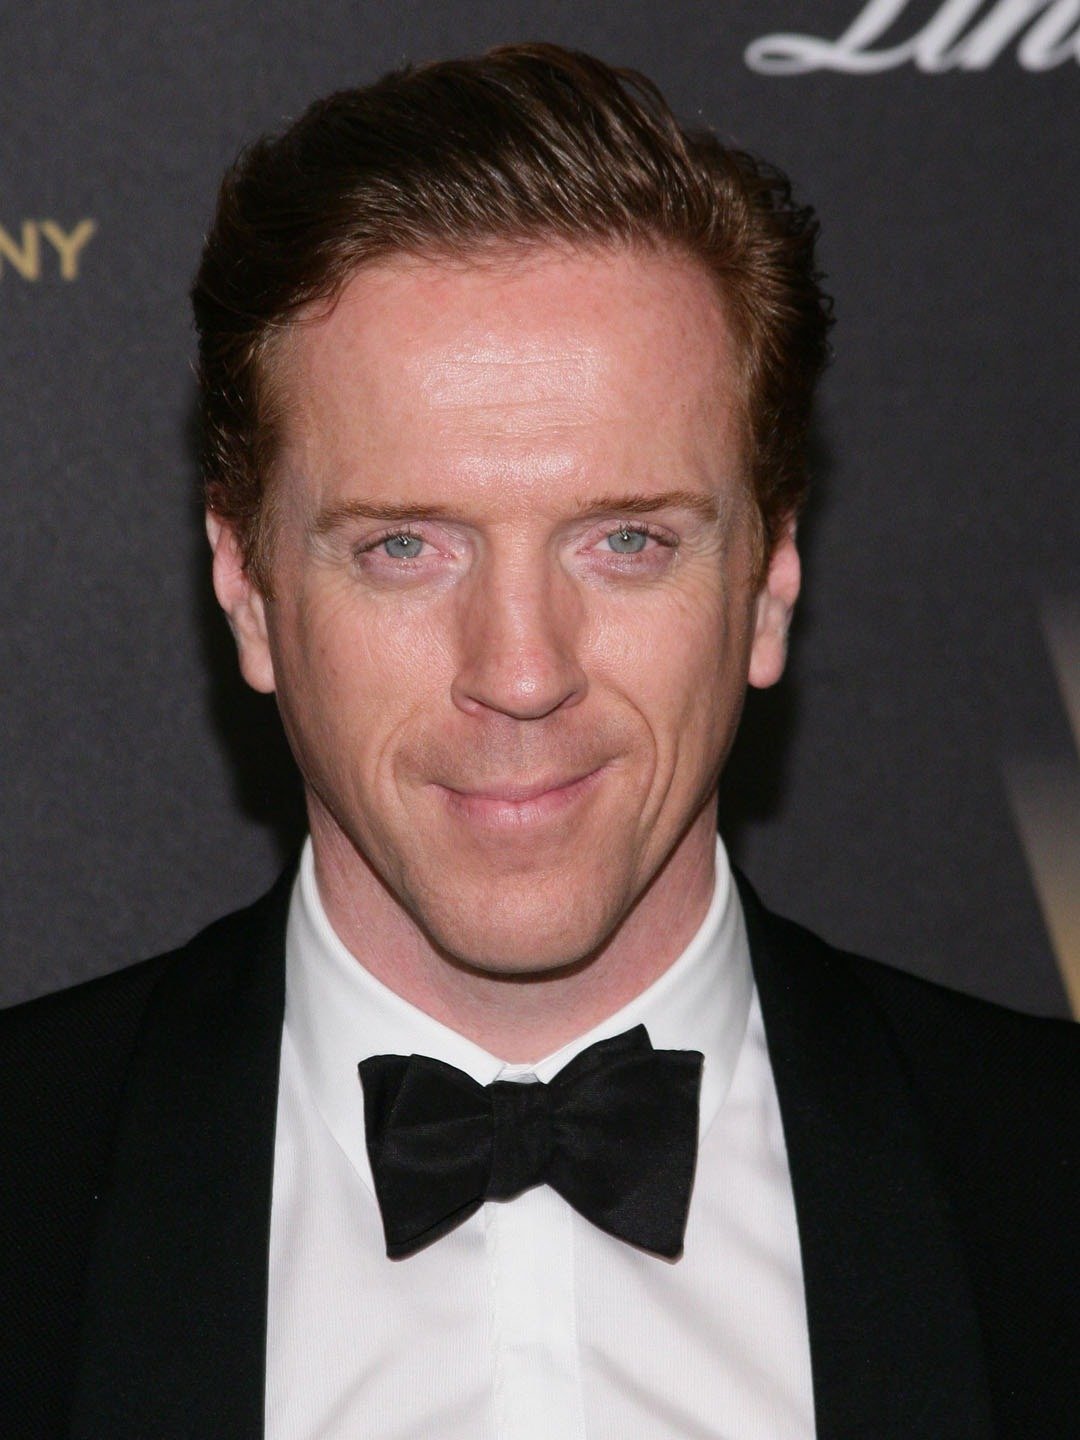 How tall is Damian Lewis?